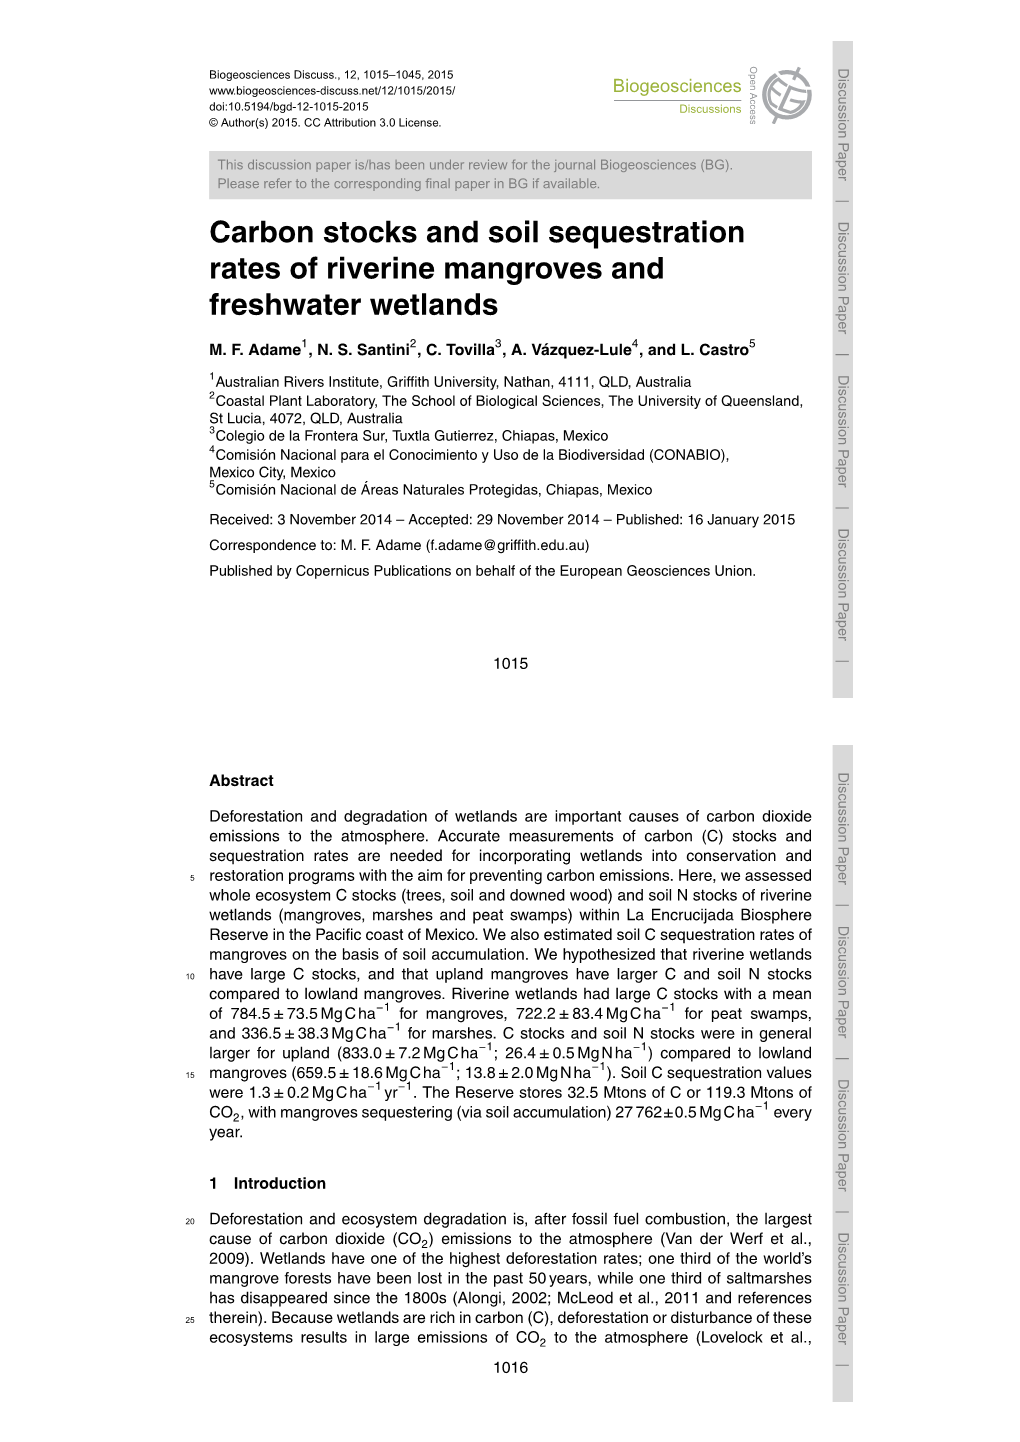 Carbon Stocks and Soil Sequestration Rates of Riverine Mangroves and Freshwater Wetlands M